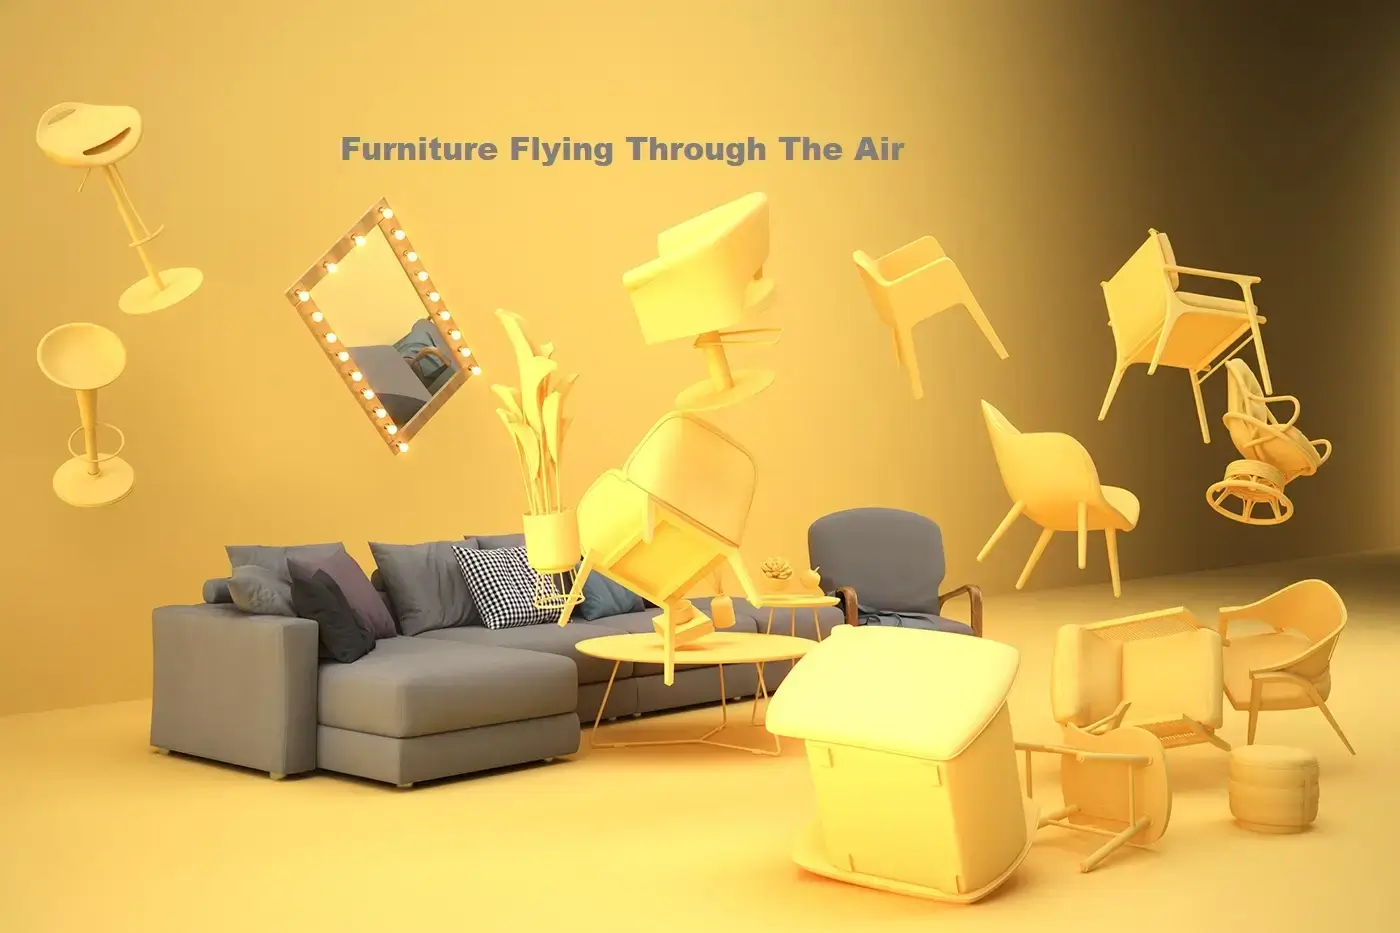 Furniture Flying Through The Air